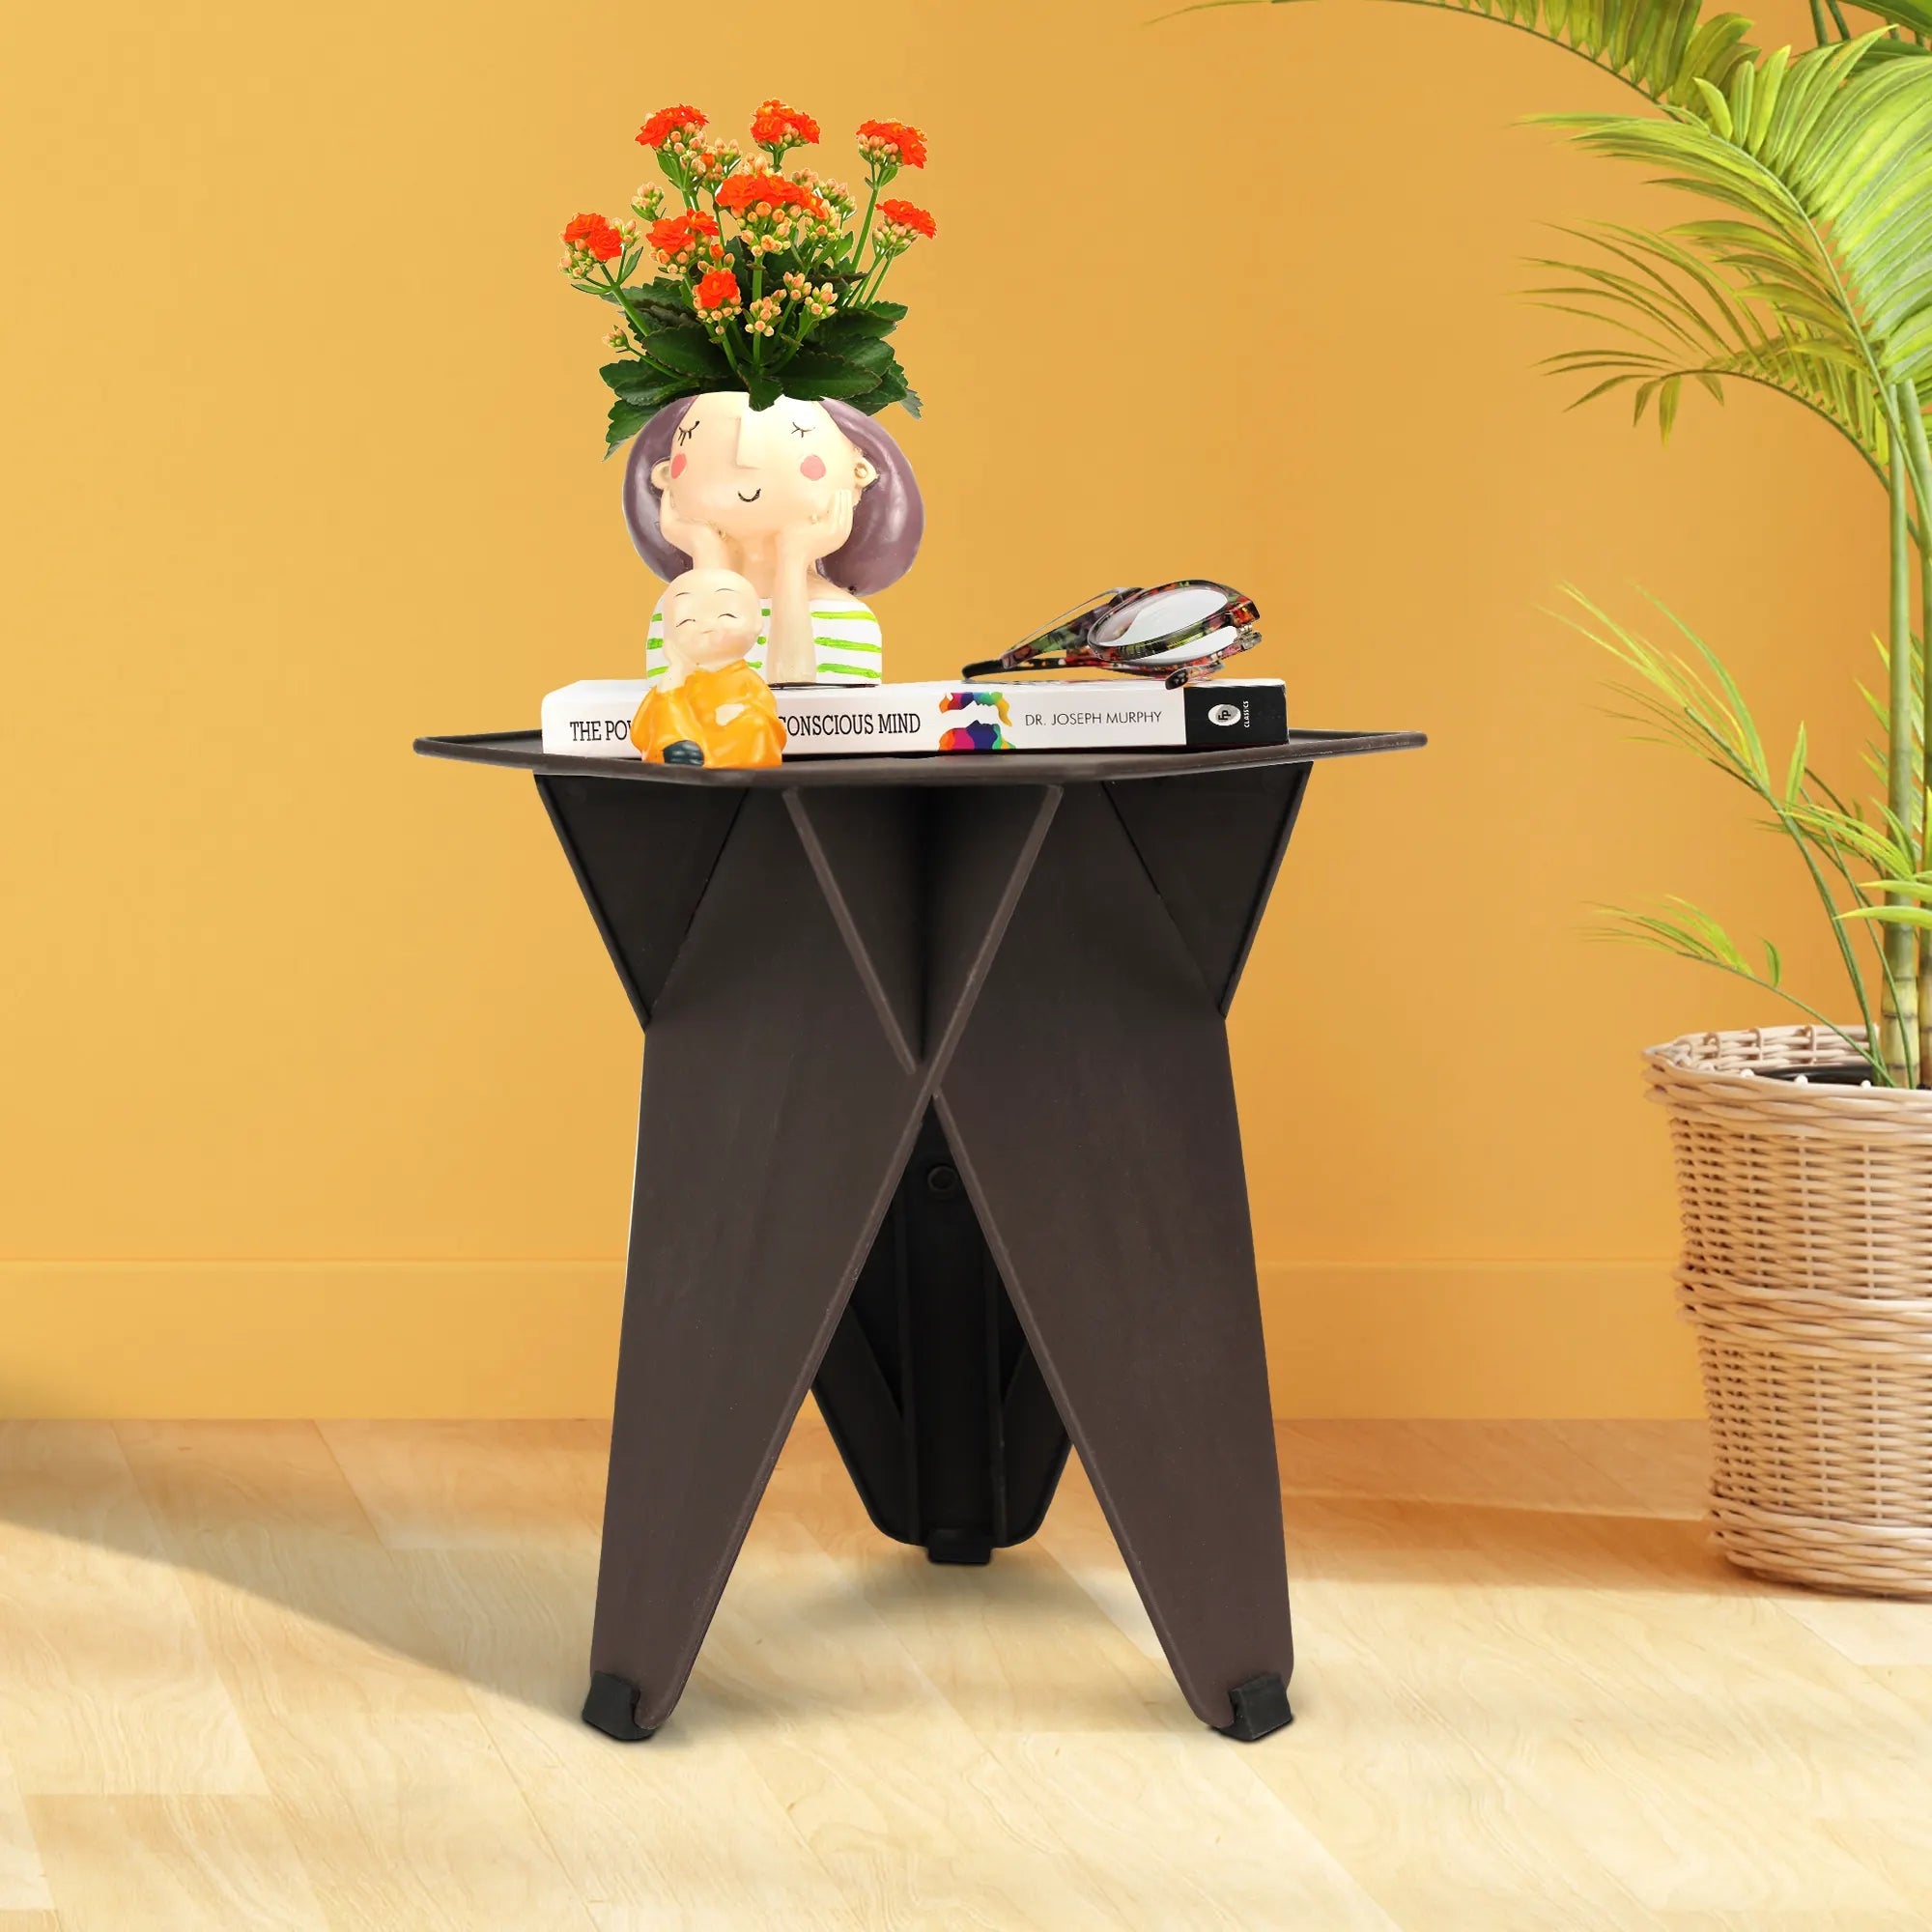 Plant Table with 10" Inch Level: Upgrade Your Home Stylistic layout with this Utilitarian Piece